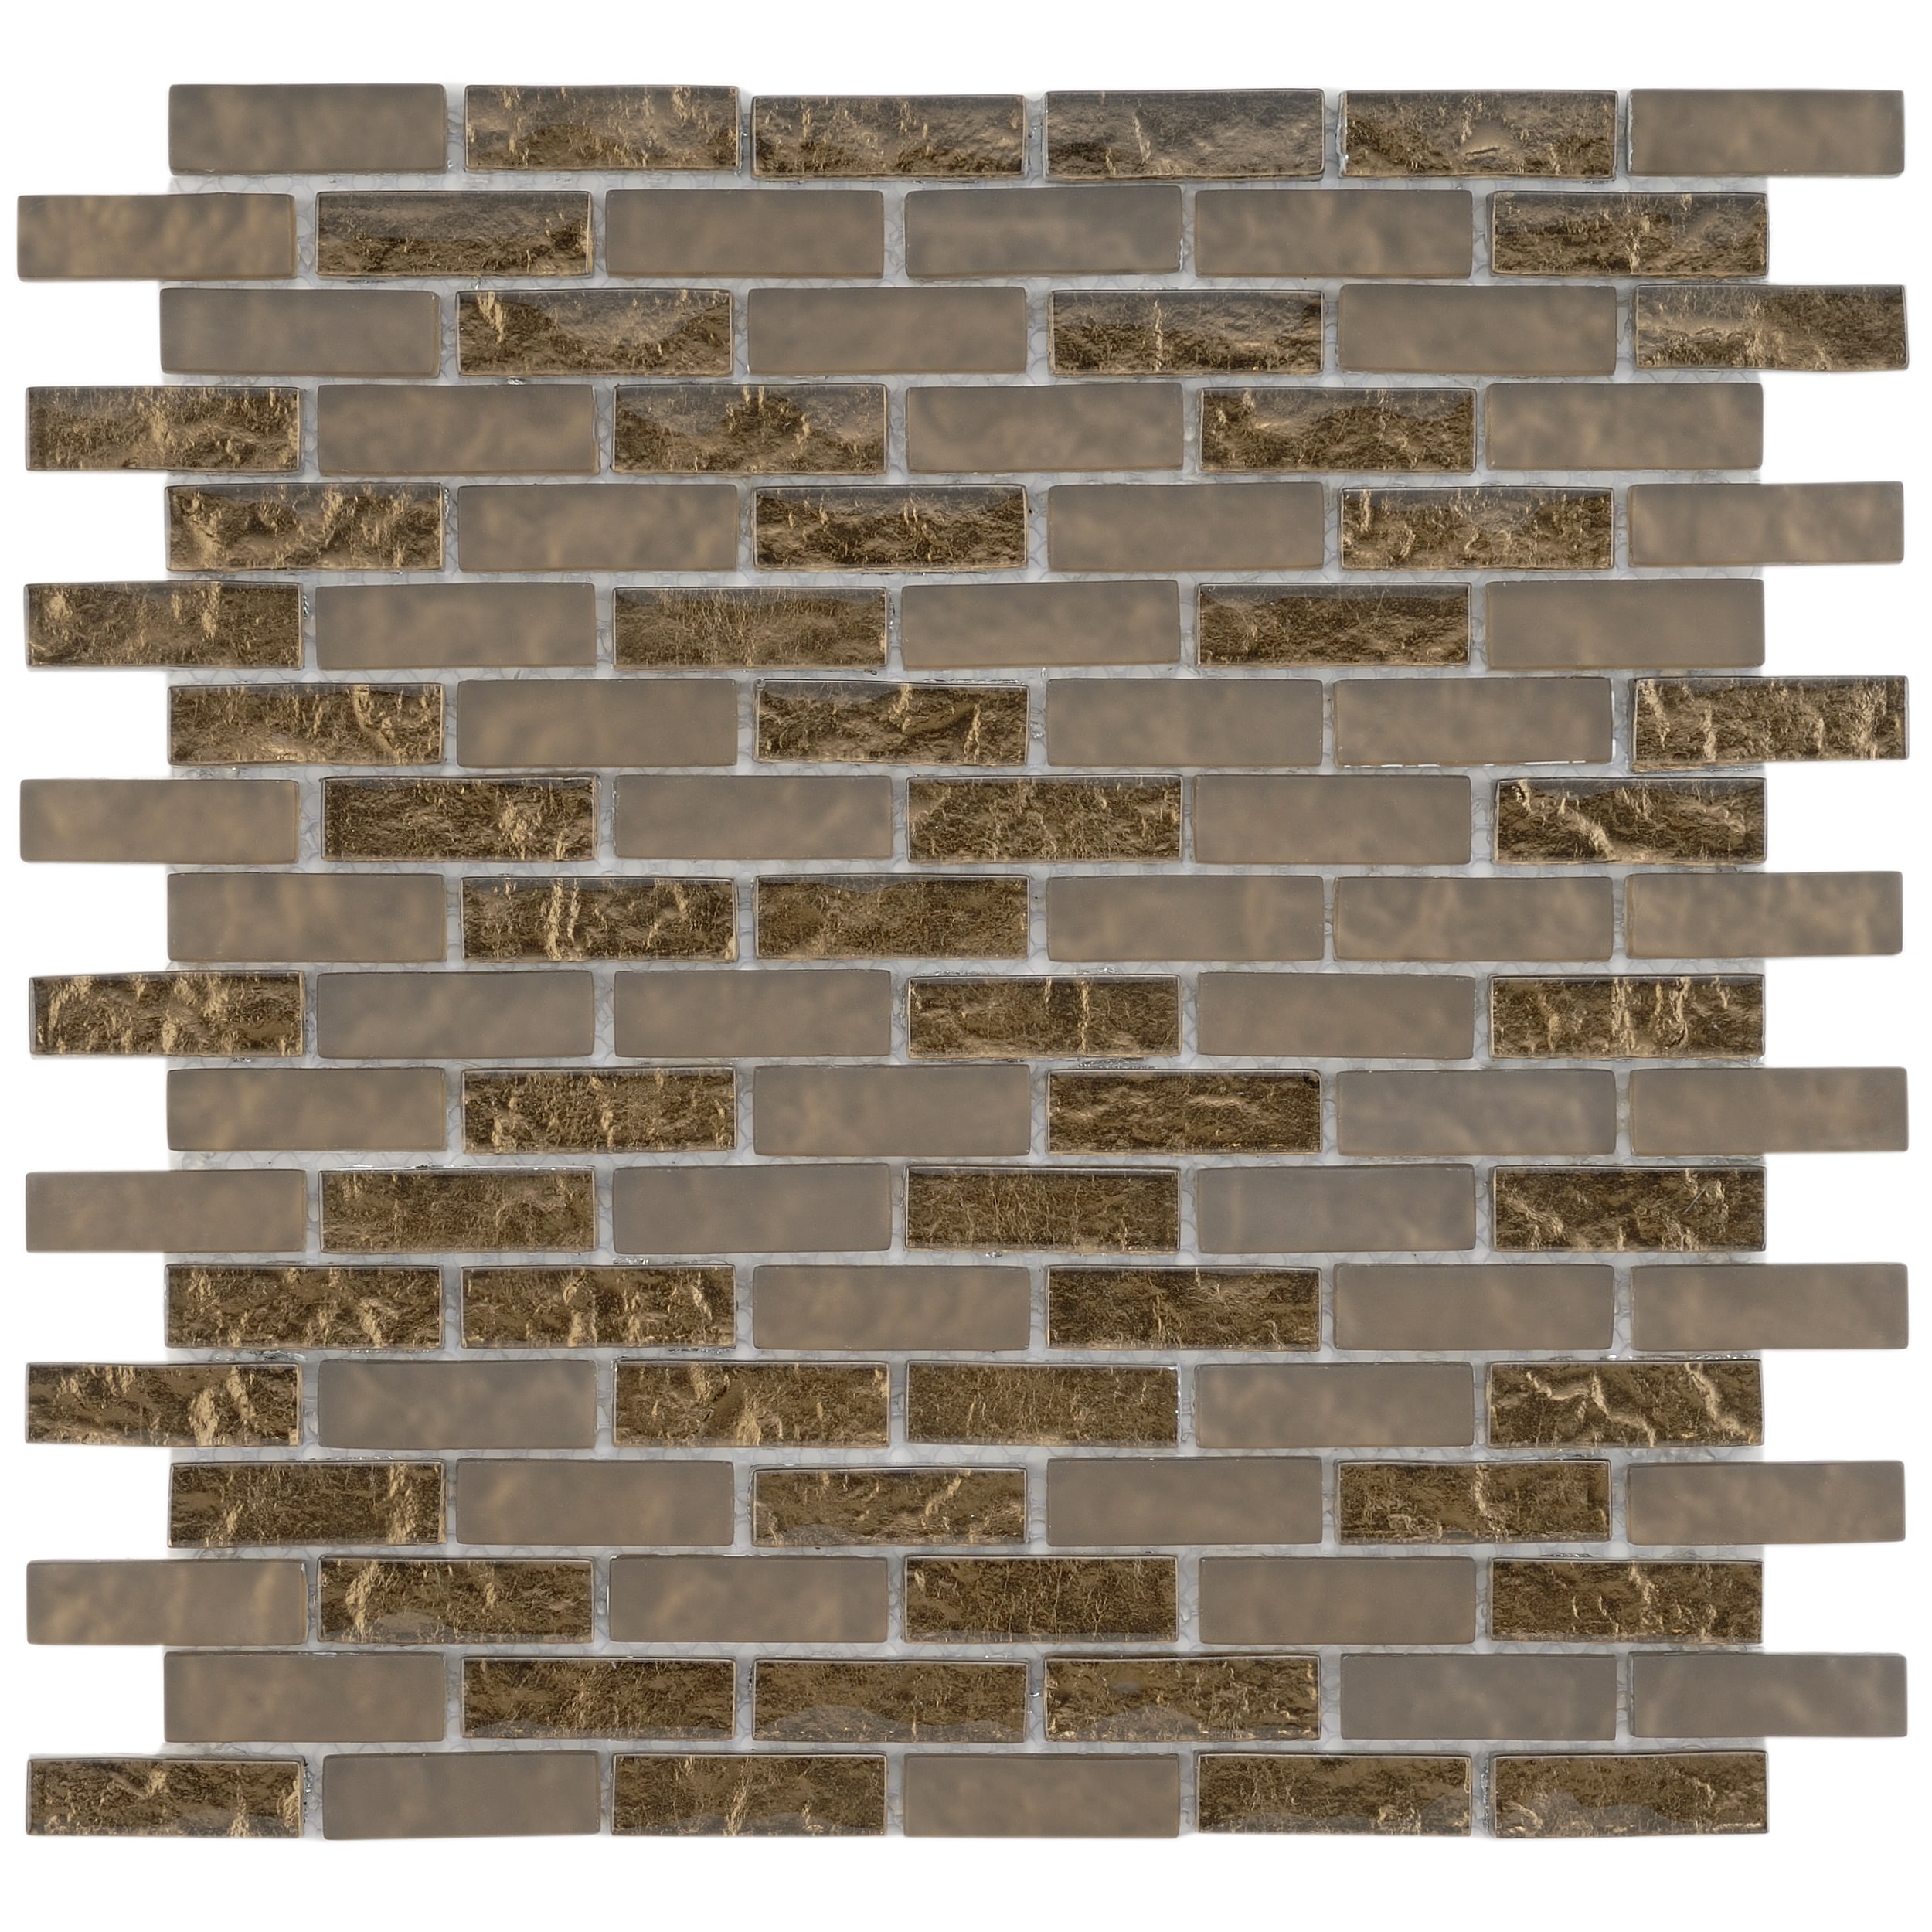 Mosaic Tile (Pack of 10) Today $156.99 5.0 (2 reviews)